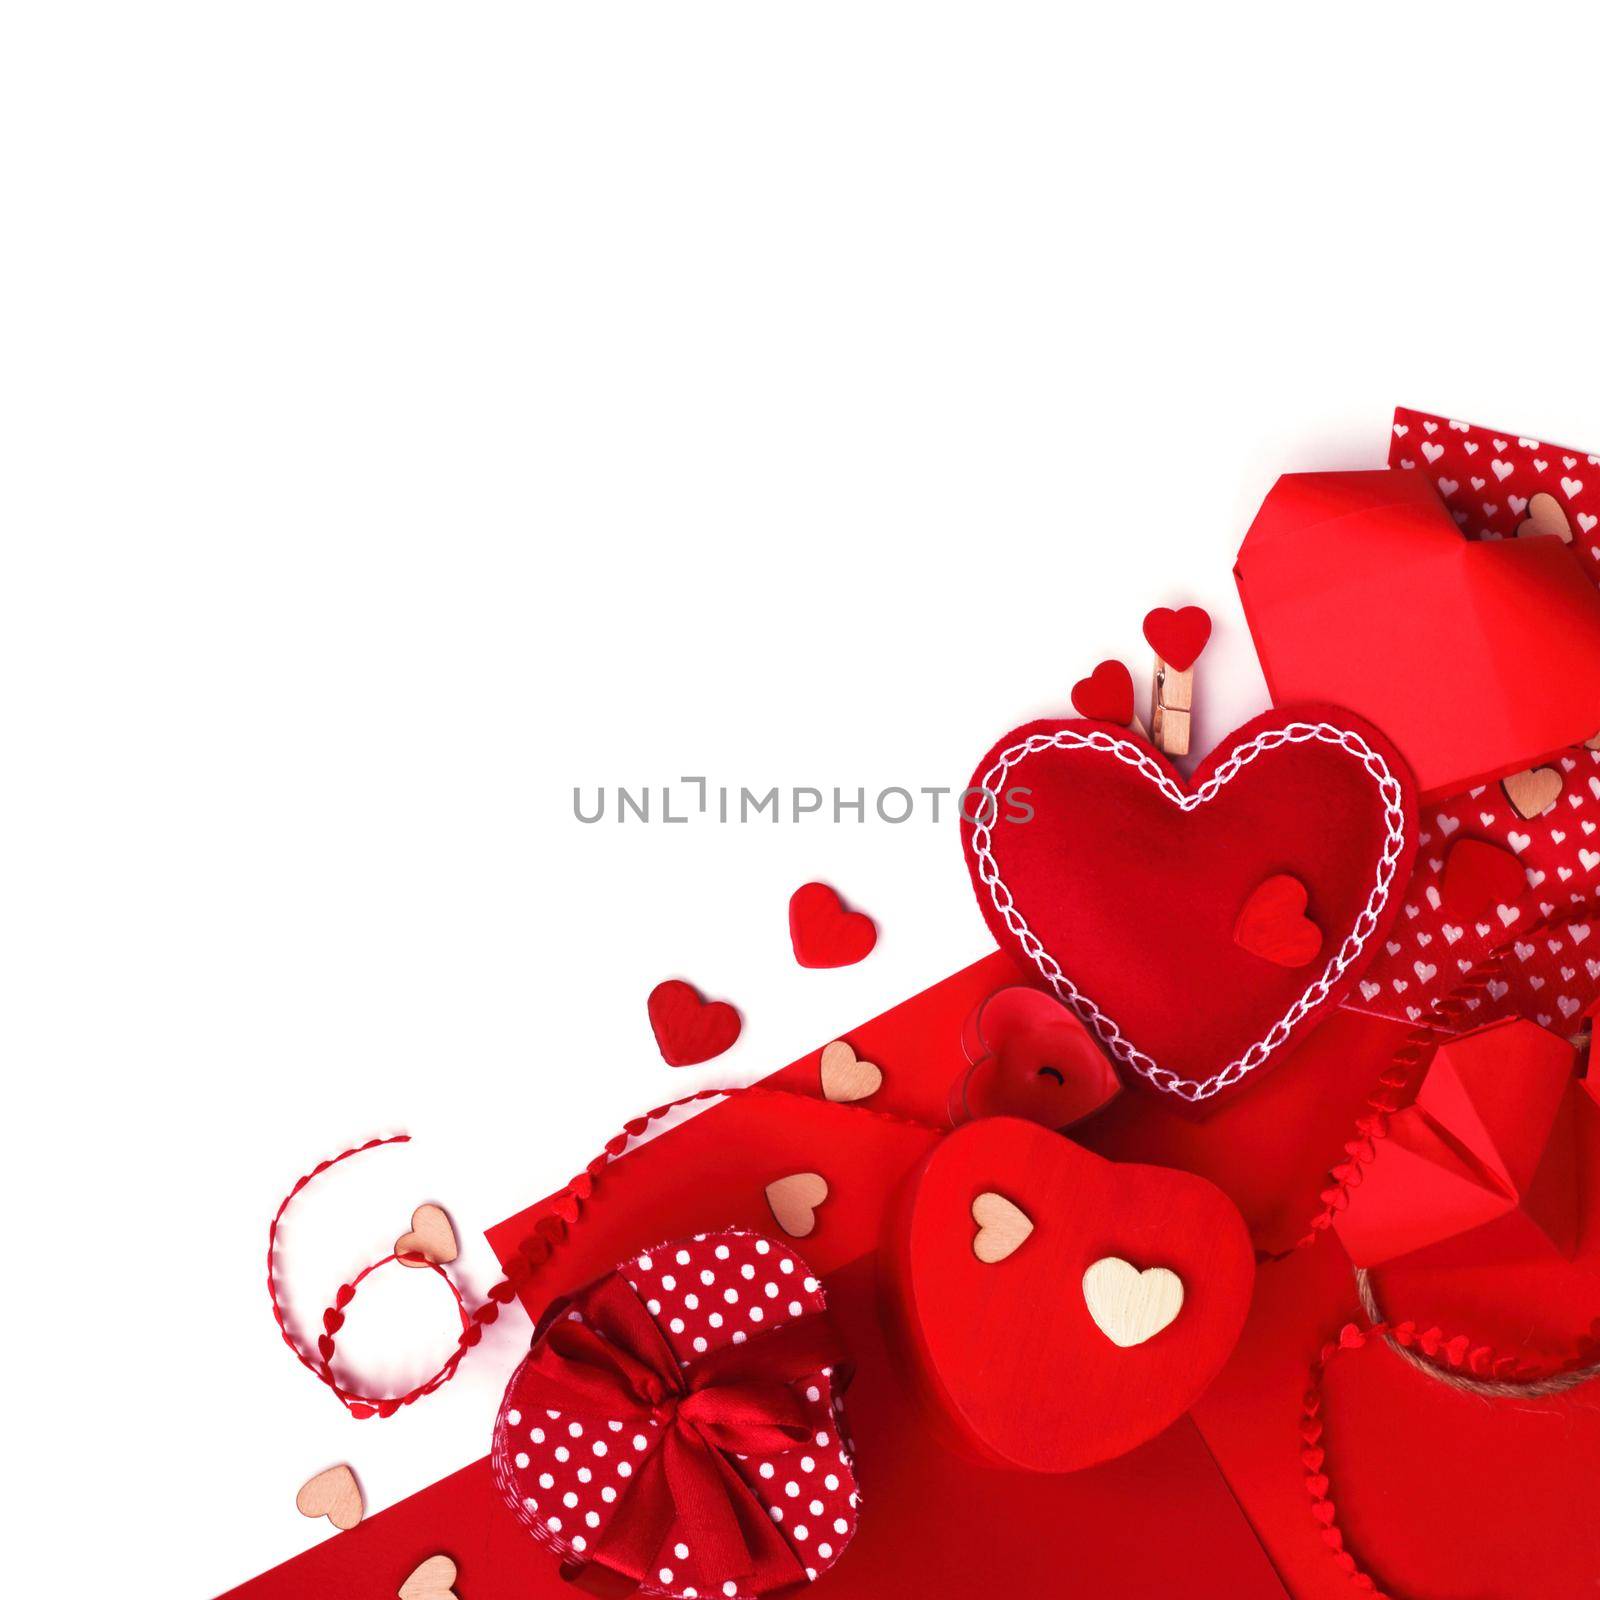 Many valentine day hearts and decor, homemade craft concept, red fabric, paper, gifts and candles, isolated on white background copy space for text